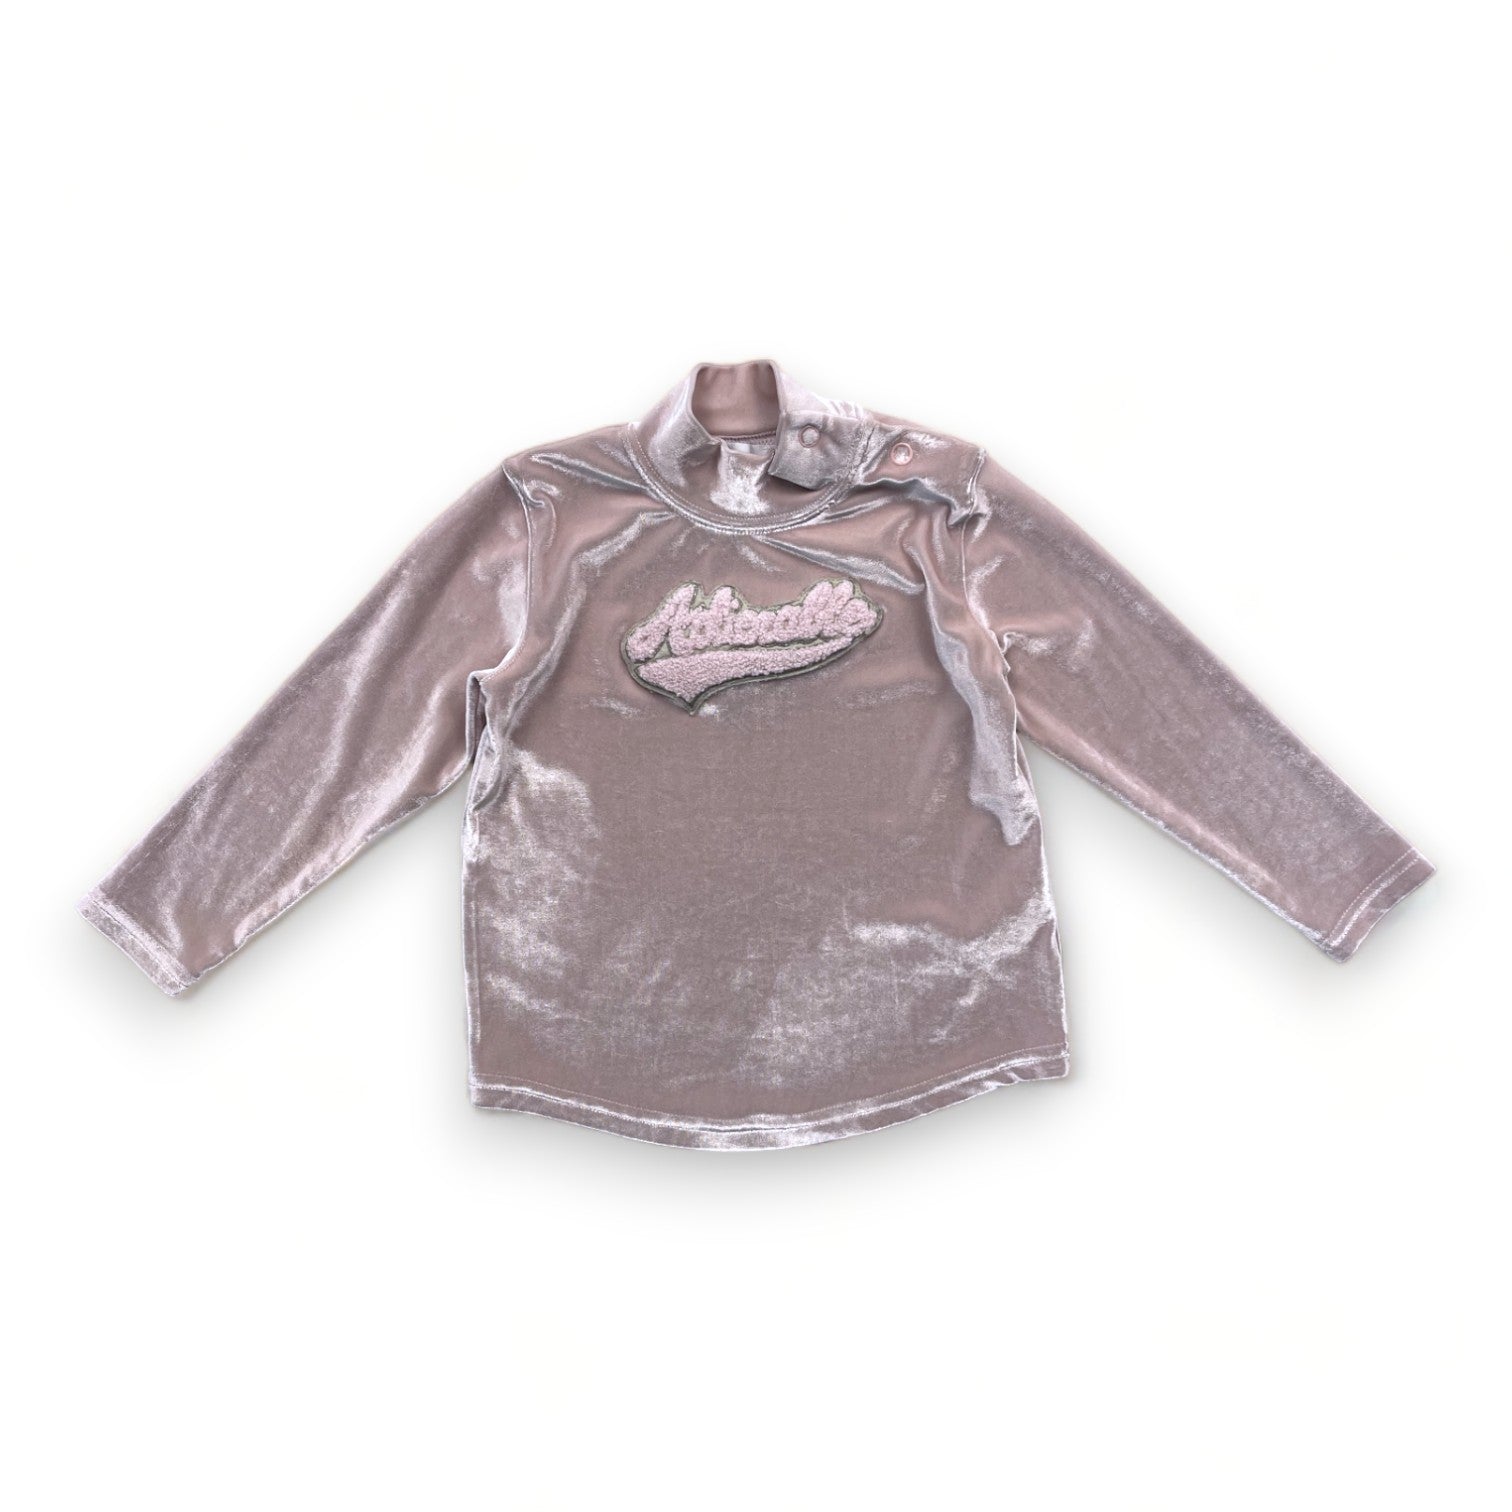 BABY DIOR - T shirt manches longues en velours rose « Adiorable » - 18 mois